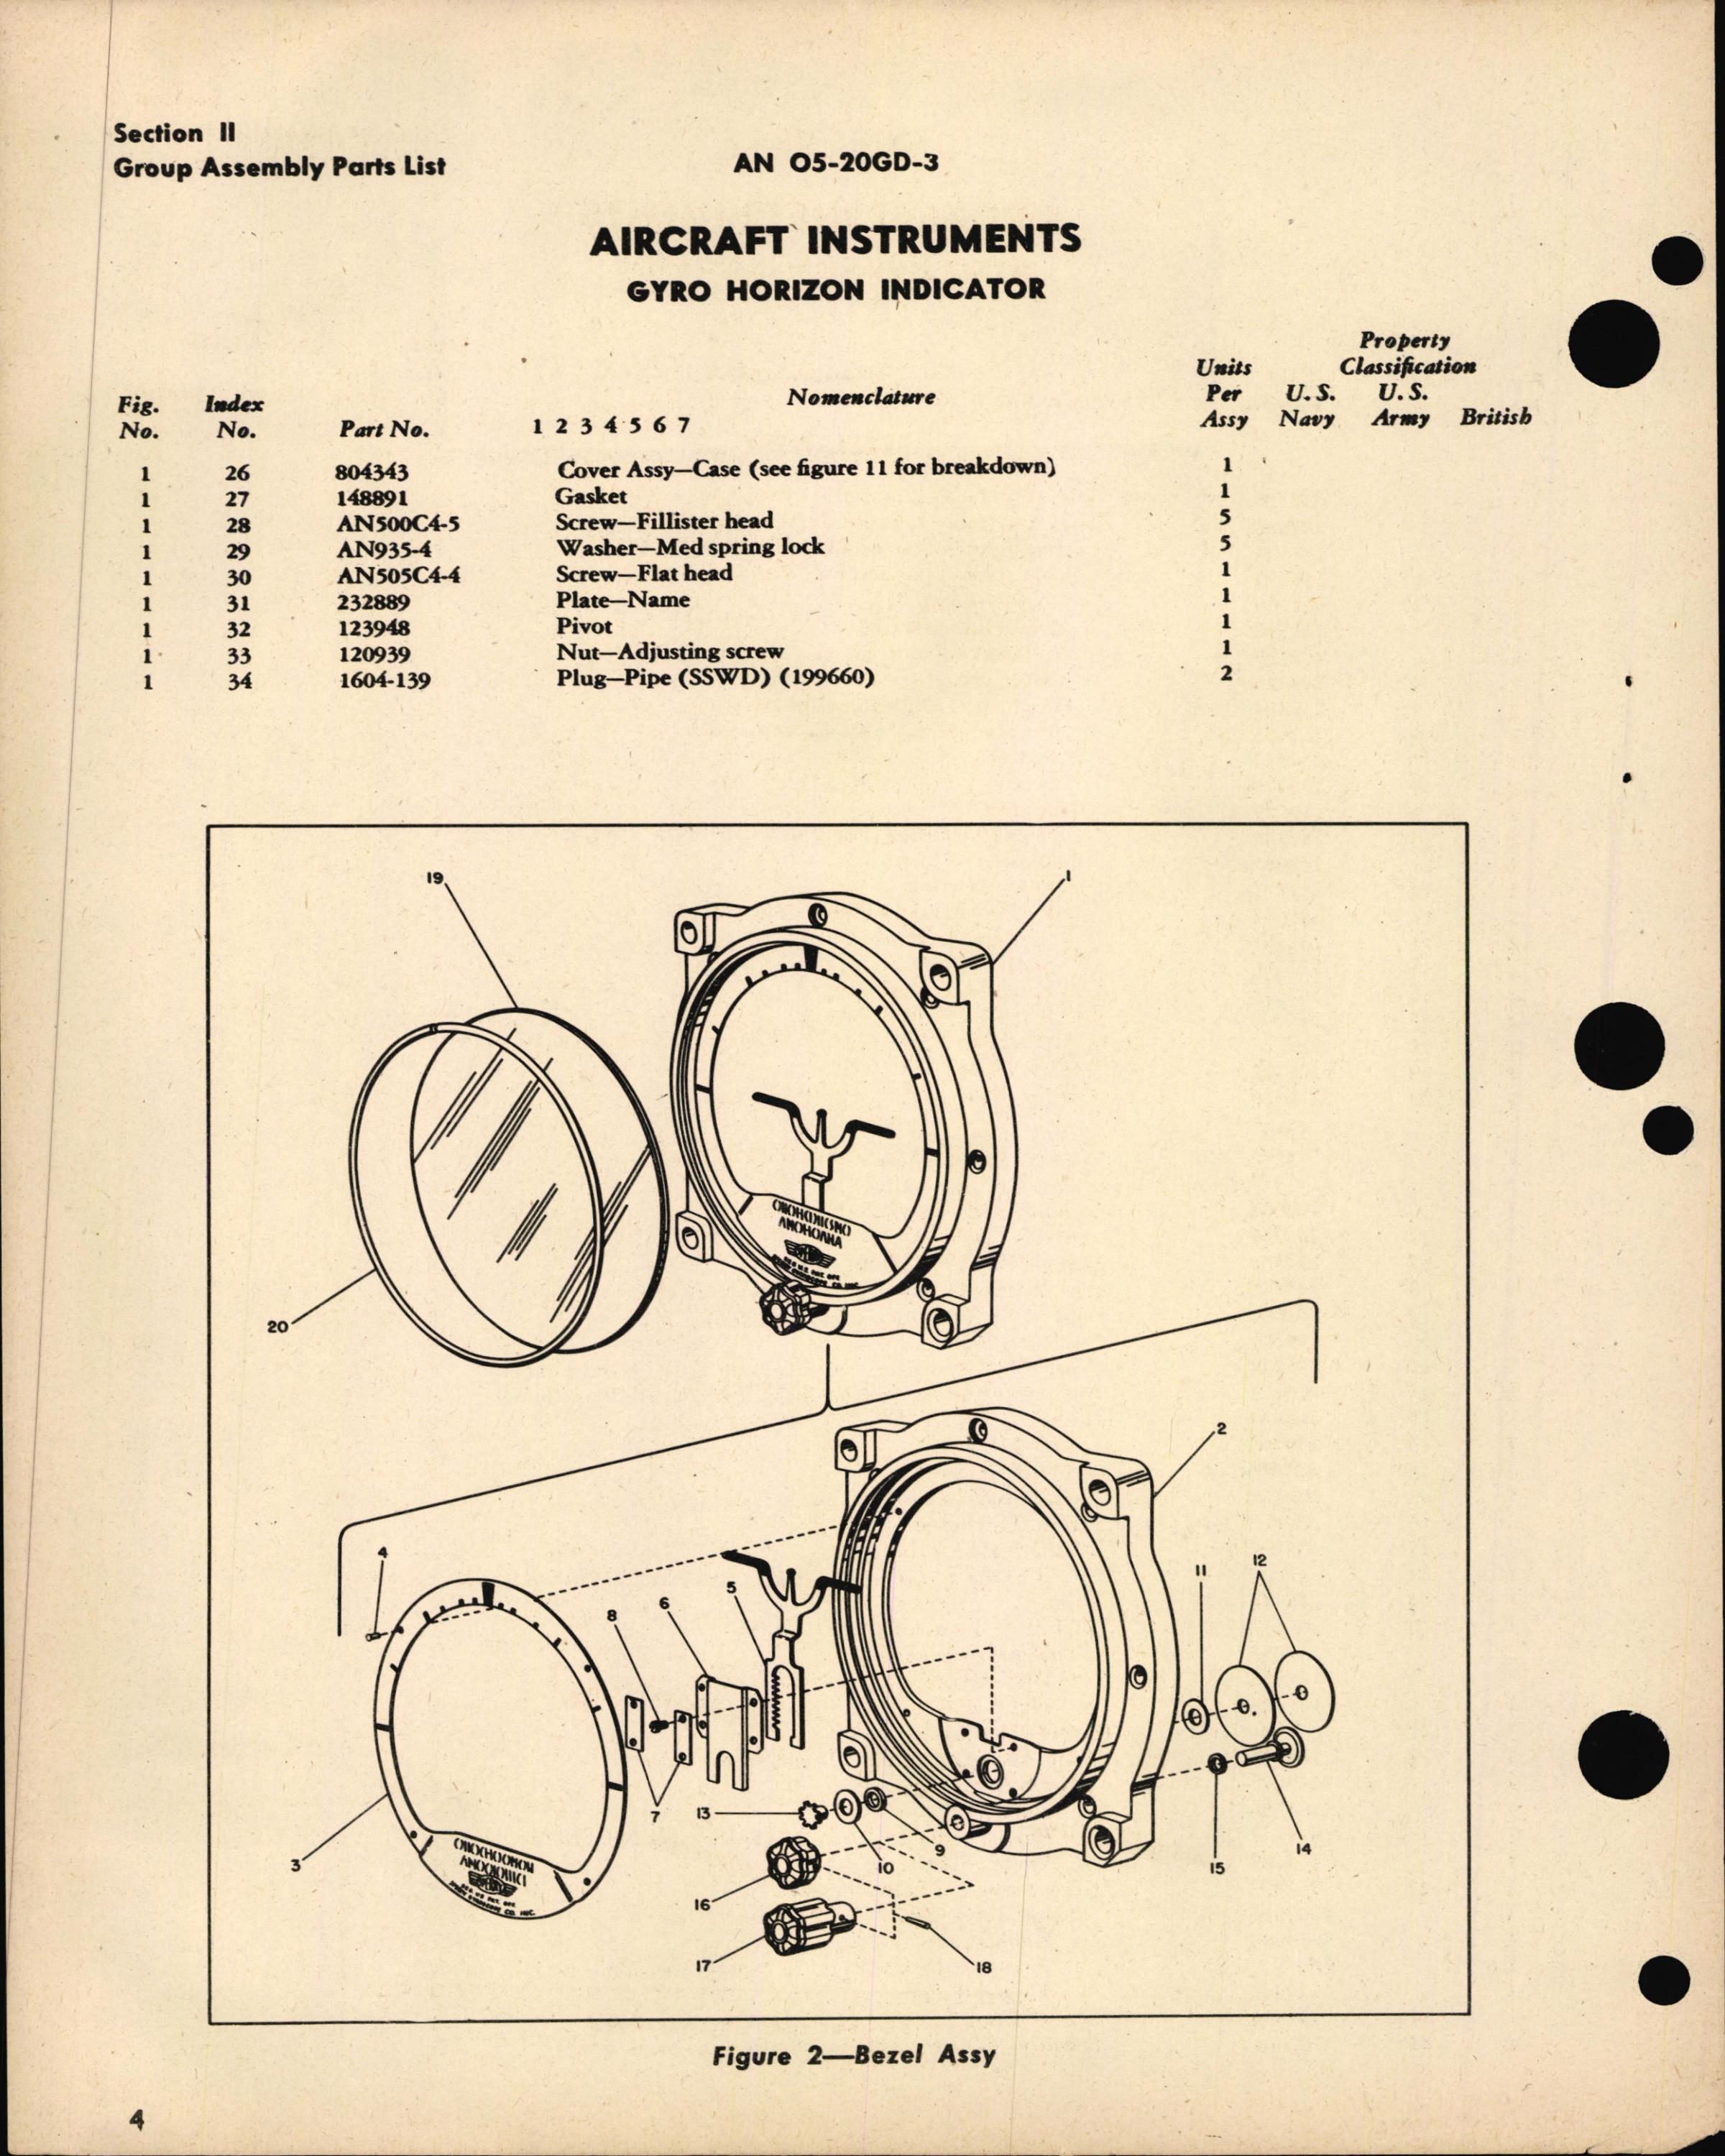 Sample page 8 from AirCorps Library document: Parts Catalog for Gyro Horizon Indicators Part No. 656768